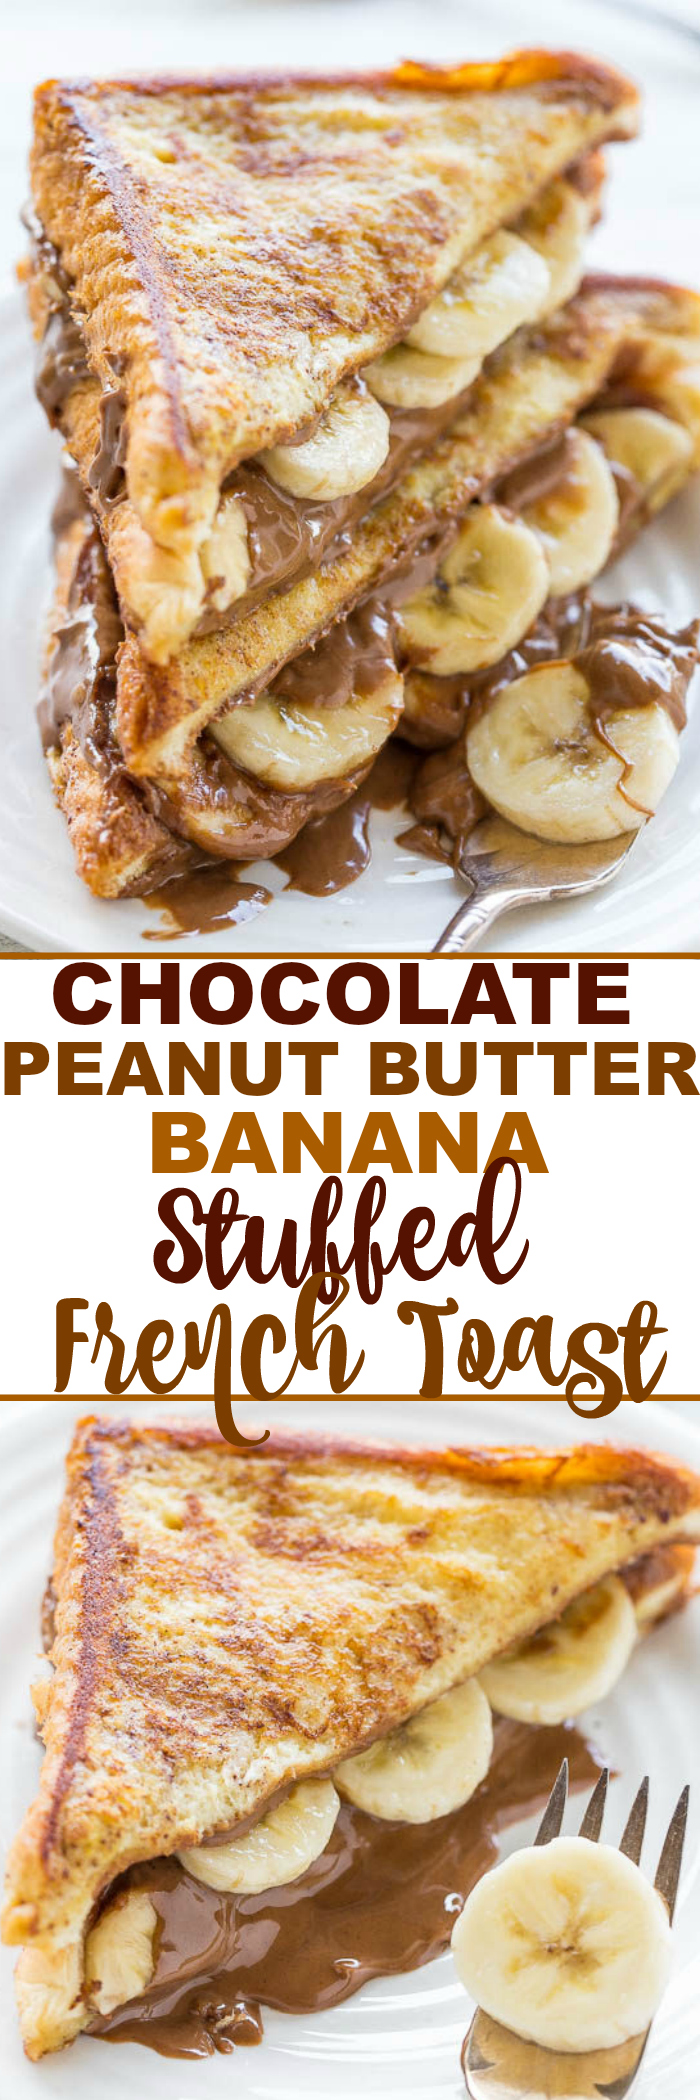 Peanut Butter Nutella Banana Toast Sandwiches - Cooking with a